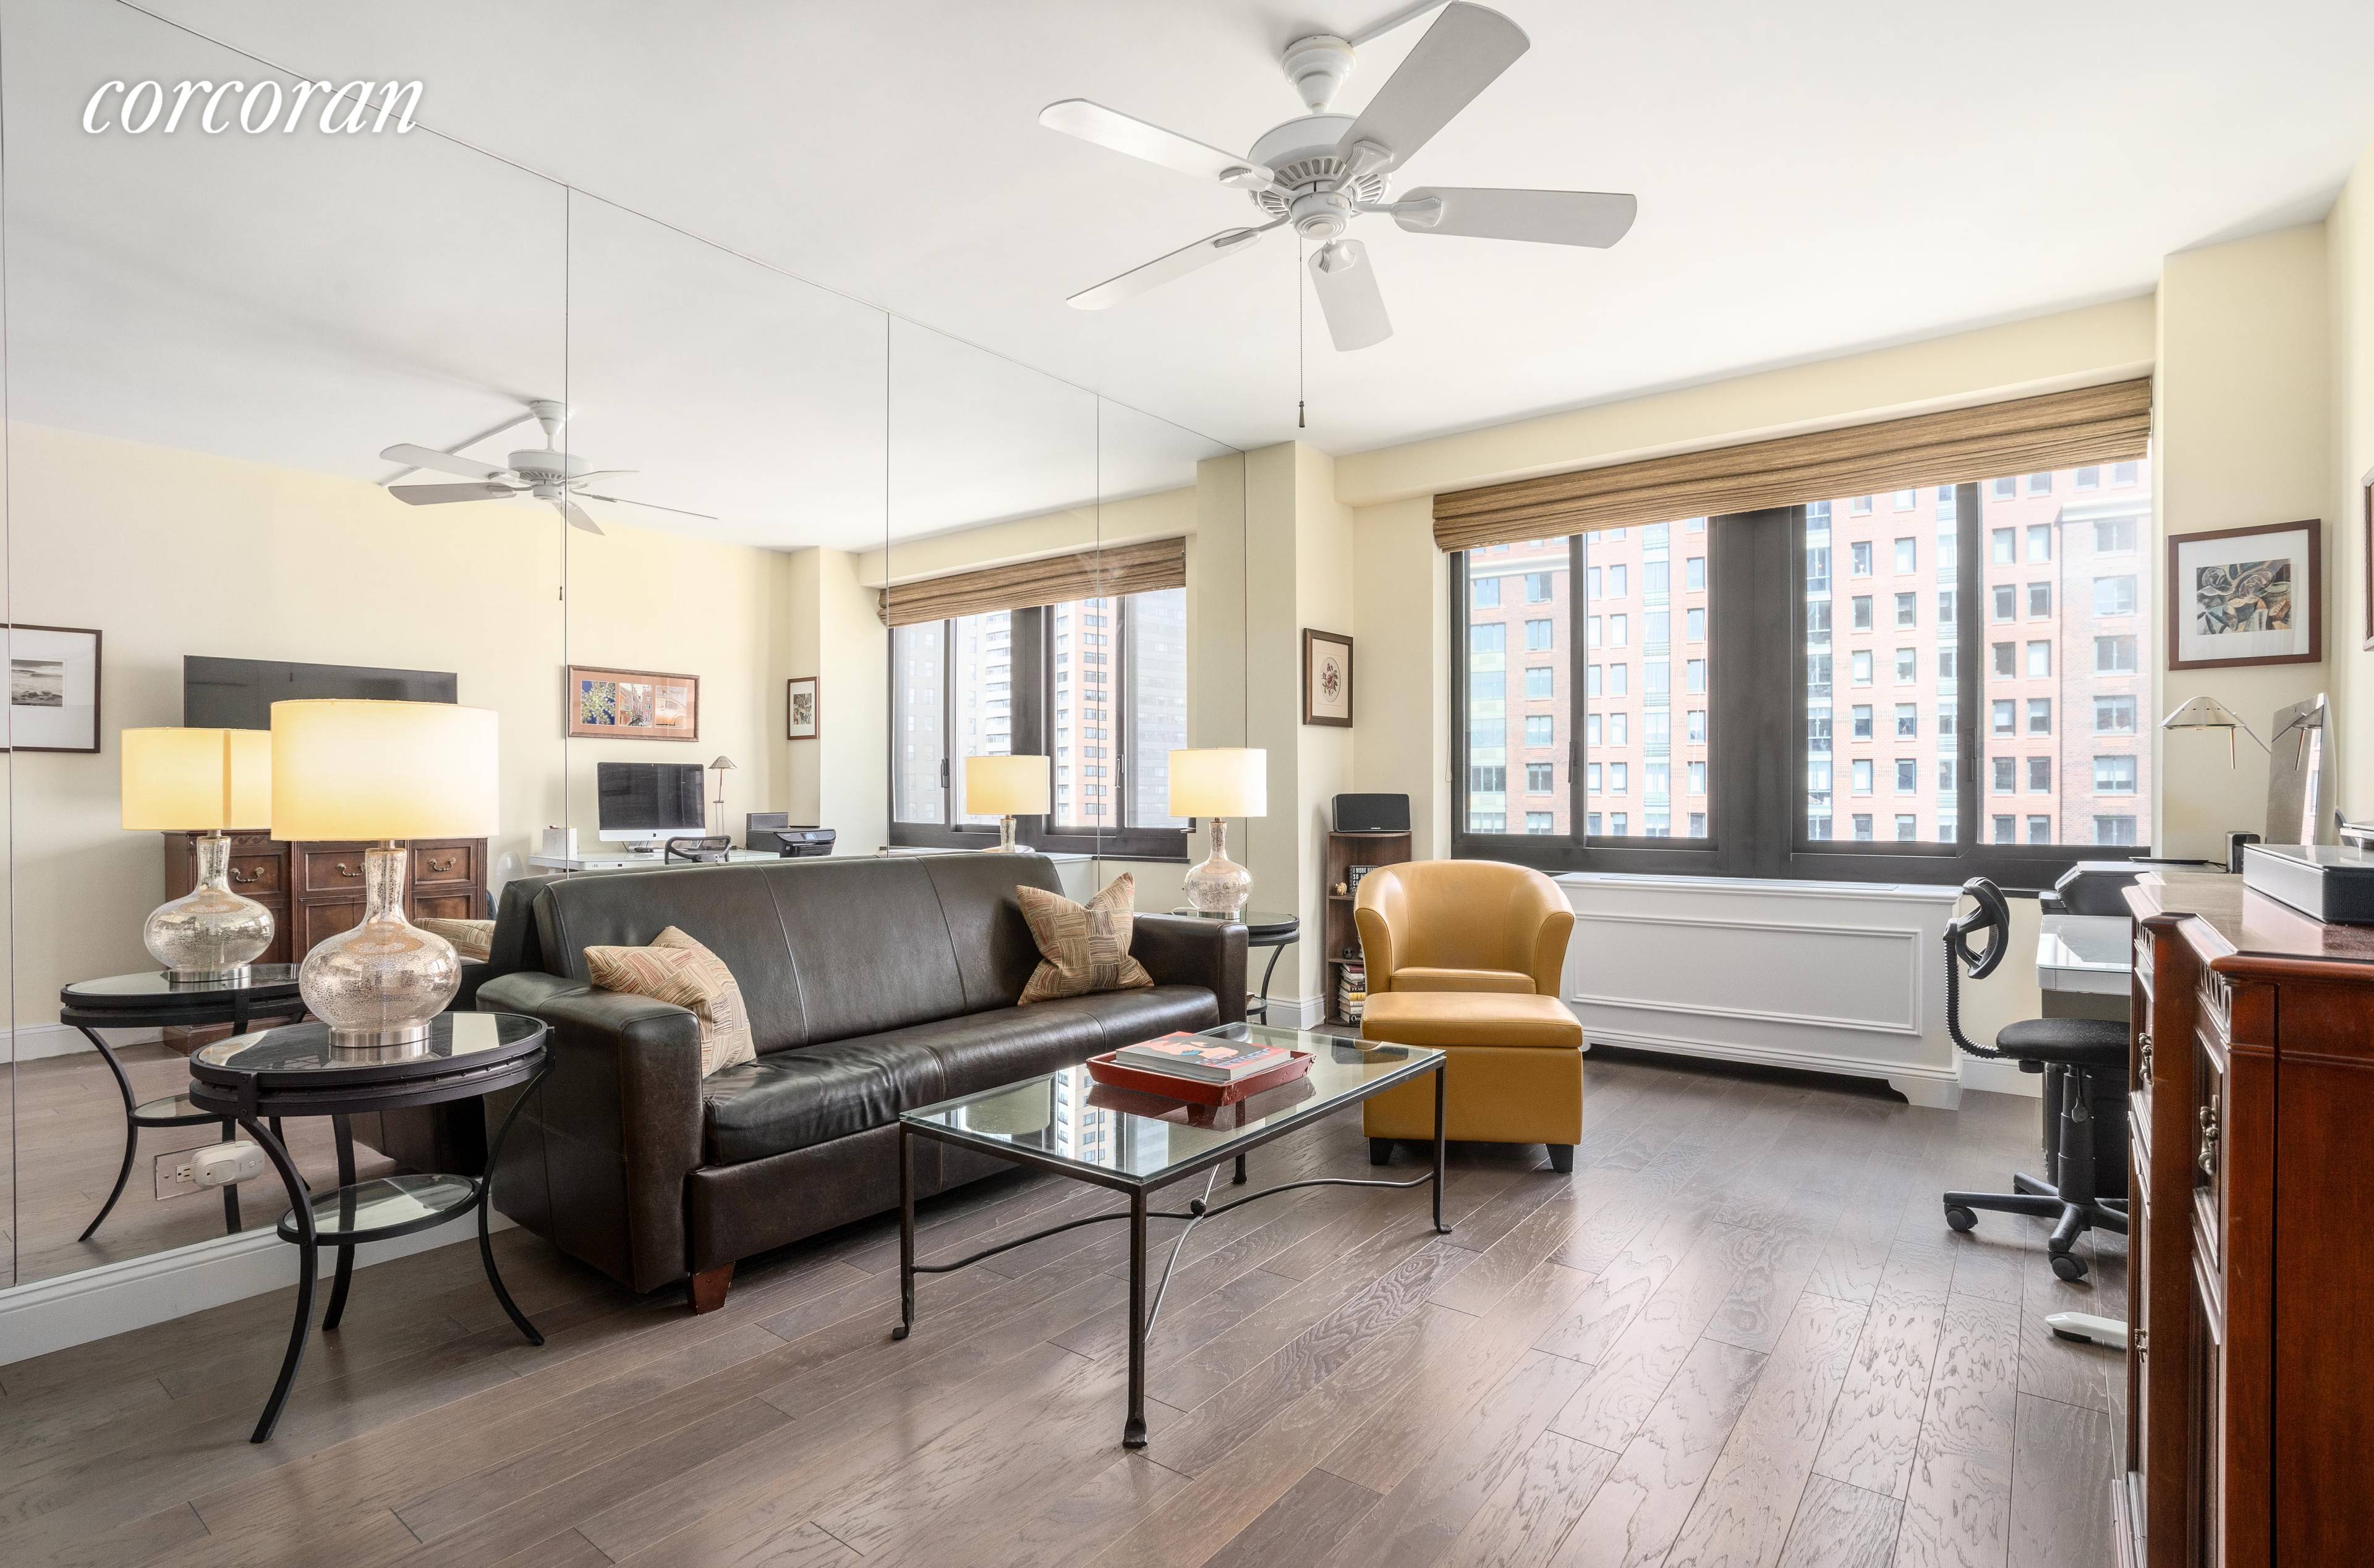 Welcome to this meticulously renovated and spacious one bedroom beauty in the uber luxury Liberty Court Condominium.